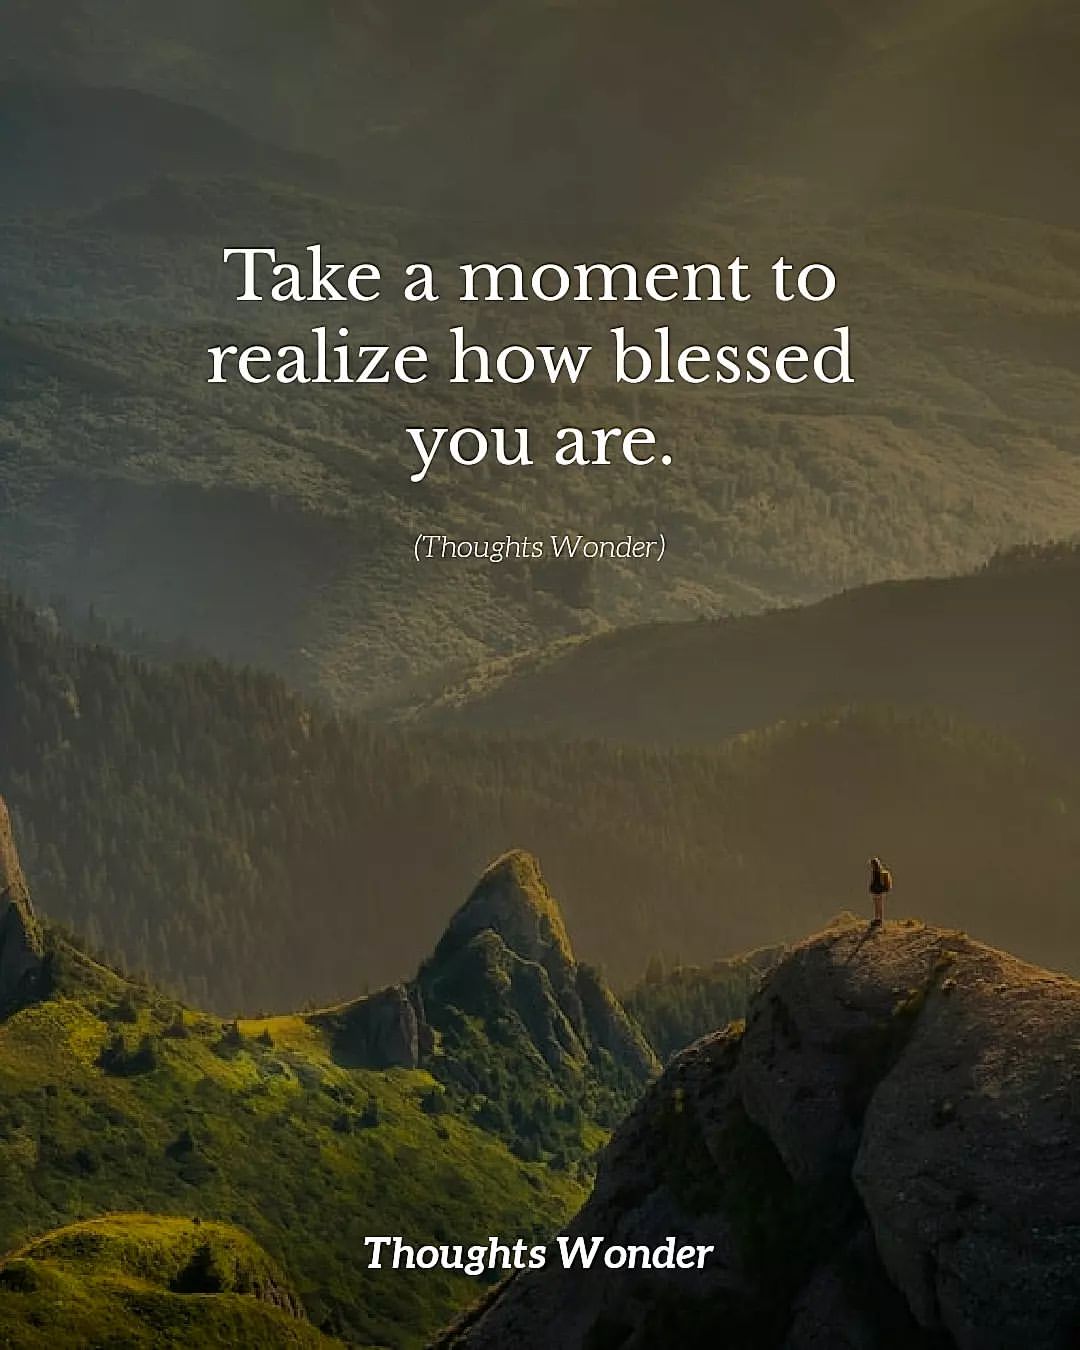 Take a moment to realize how blessed you are.